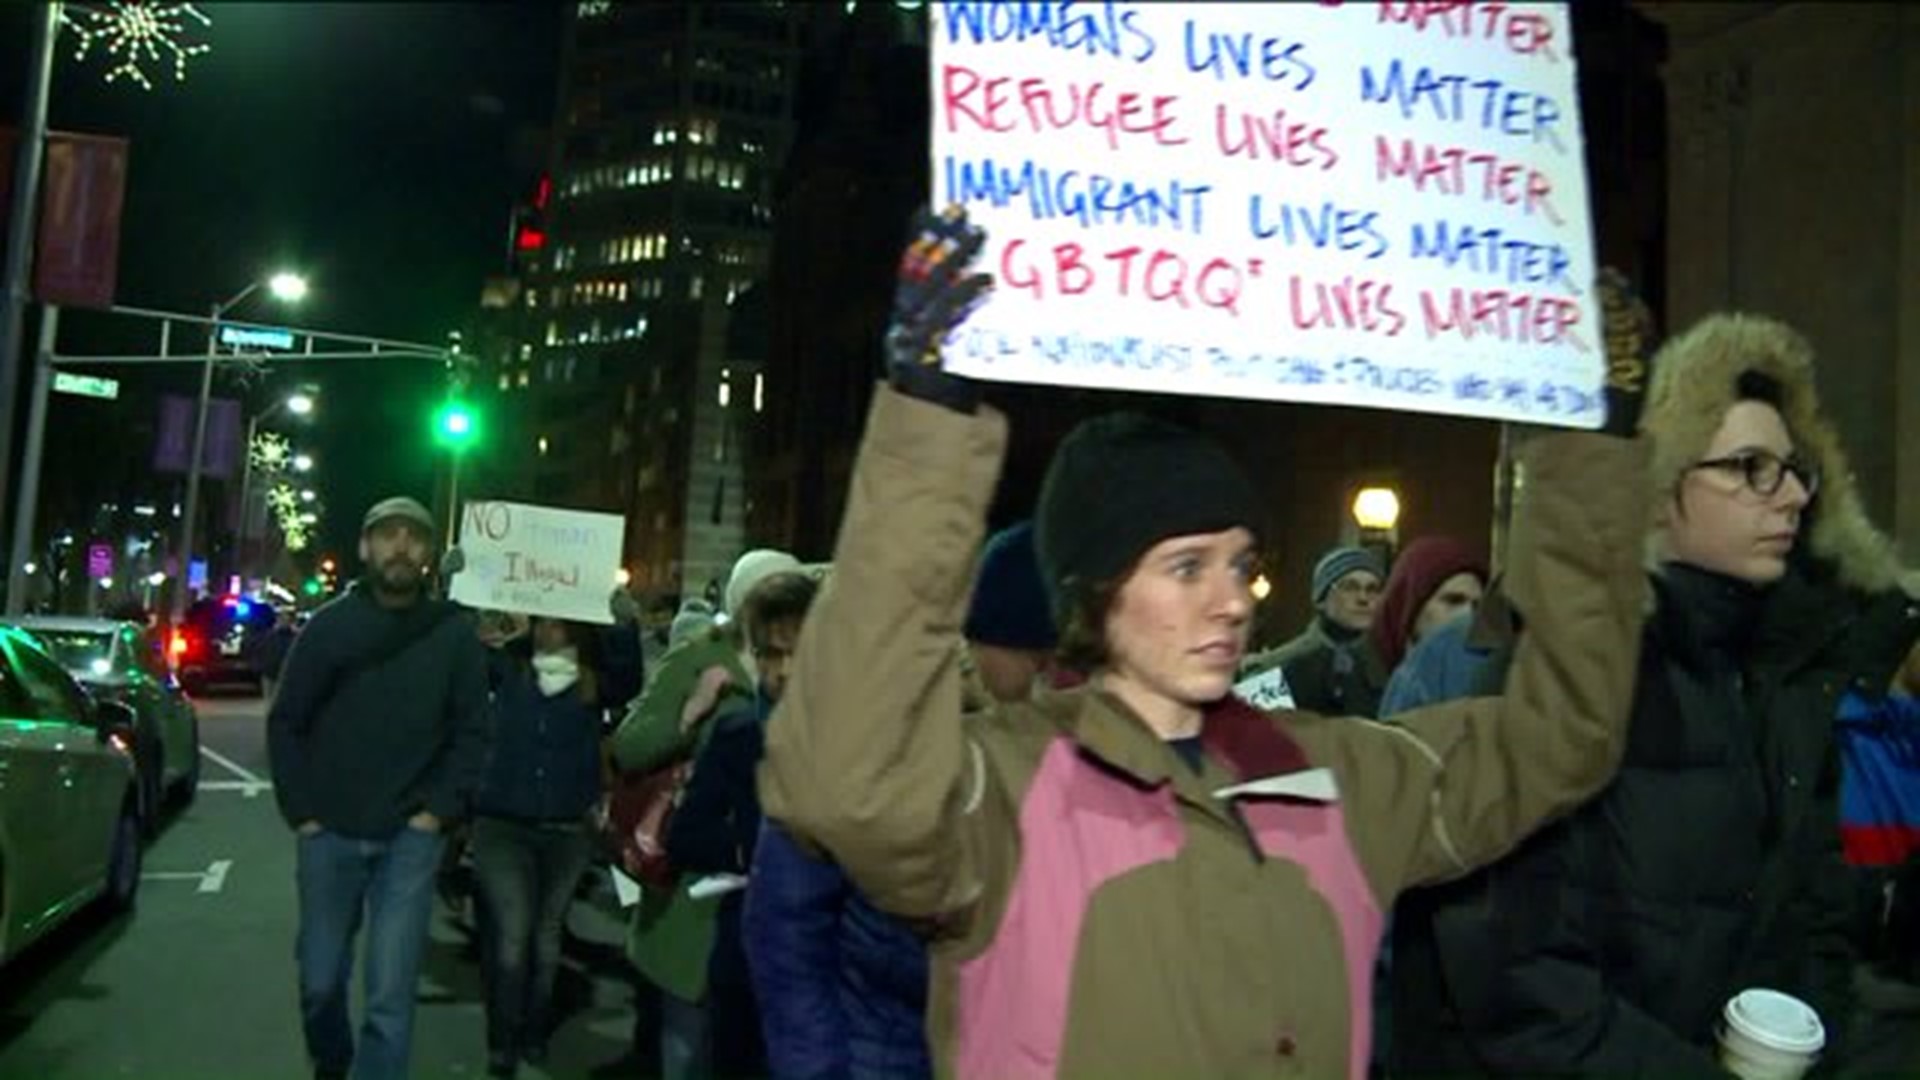 New Haven group protests changes in immigration policy